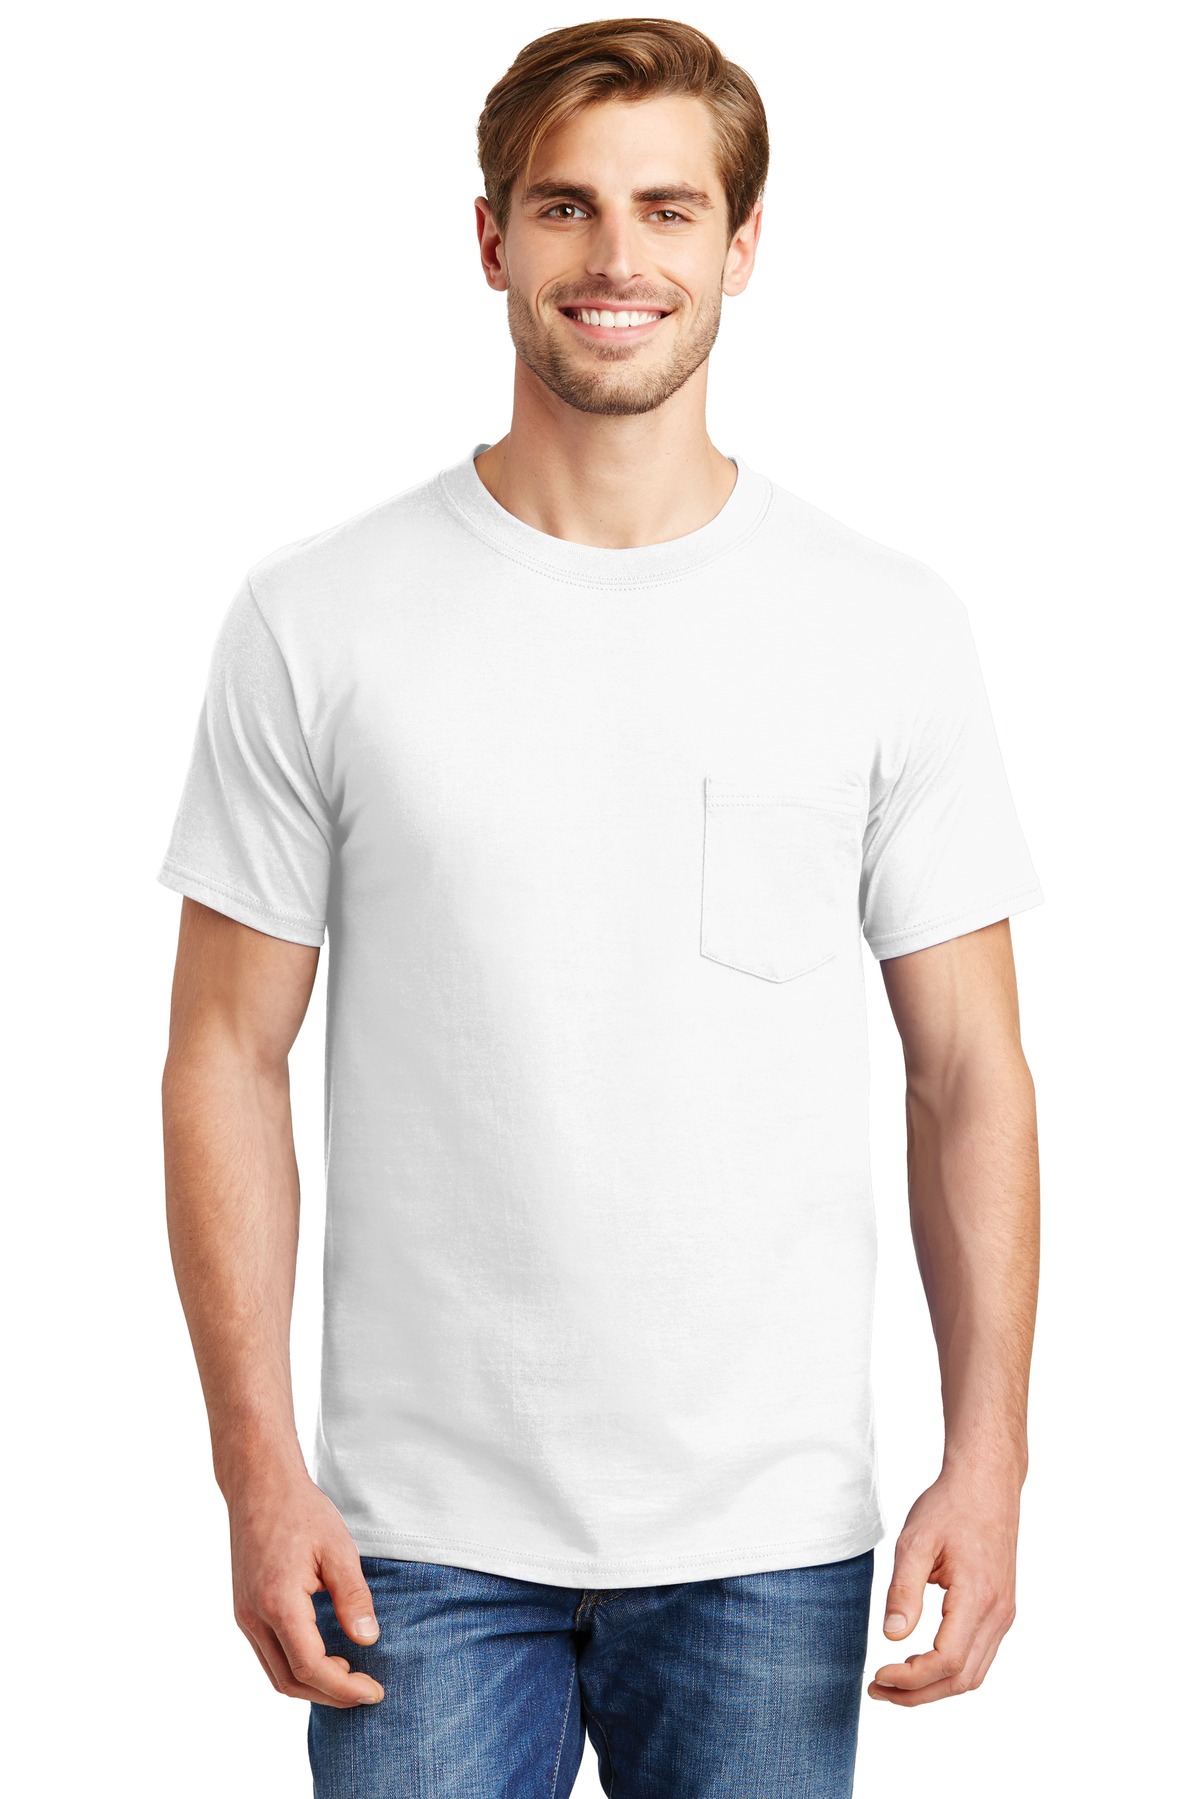 Hanes T-Shirts for Corporate Hospitality ® Beefy-T® - 100% Cotton T-Shirt with Pocket.-Hanes